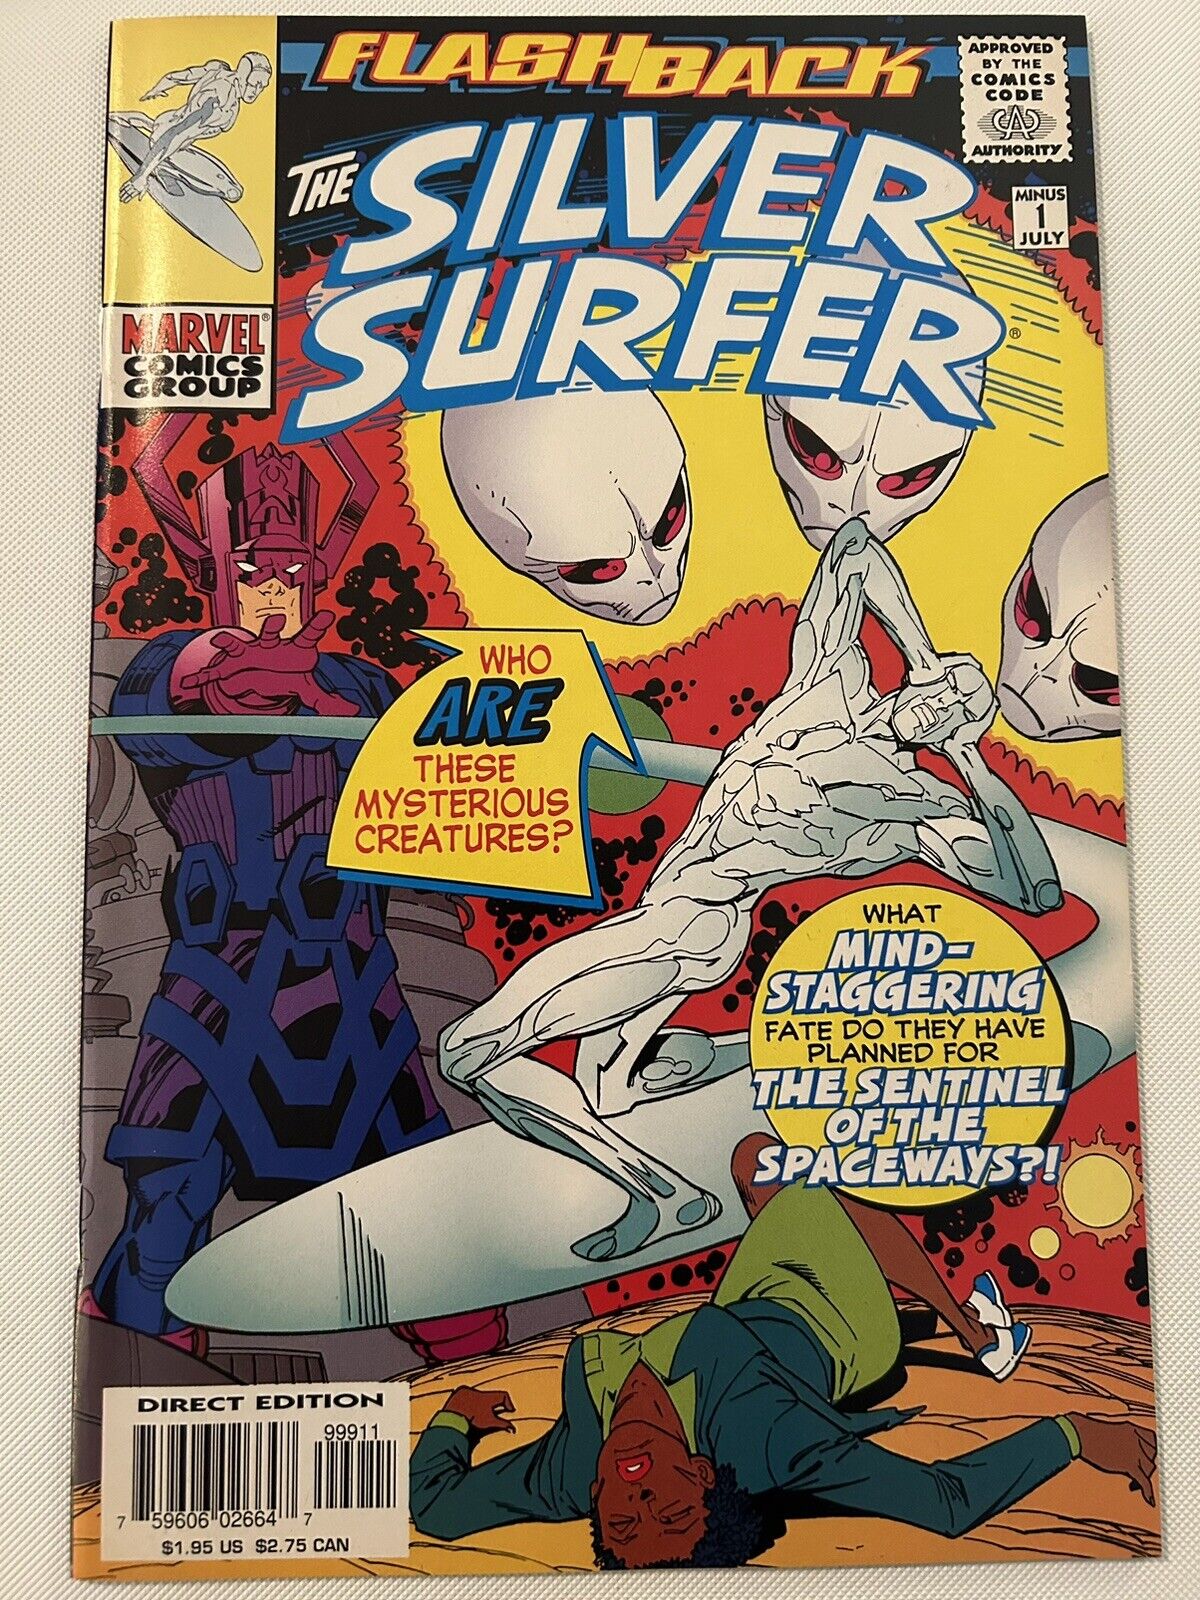 The Silver Surfer #1 (Flashback) - 1997